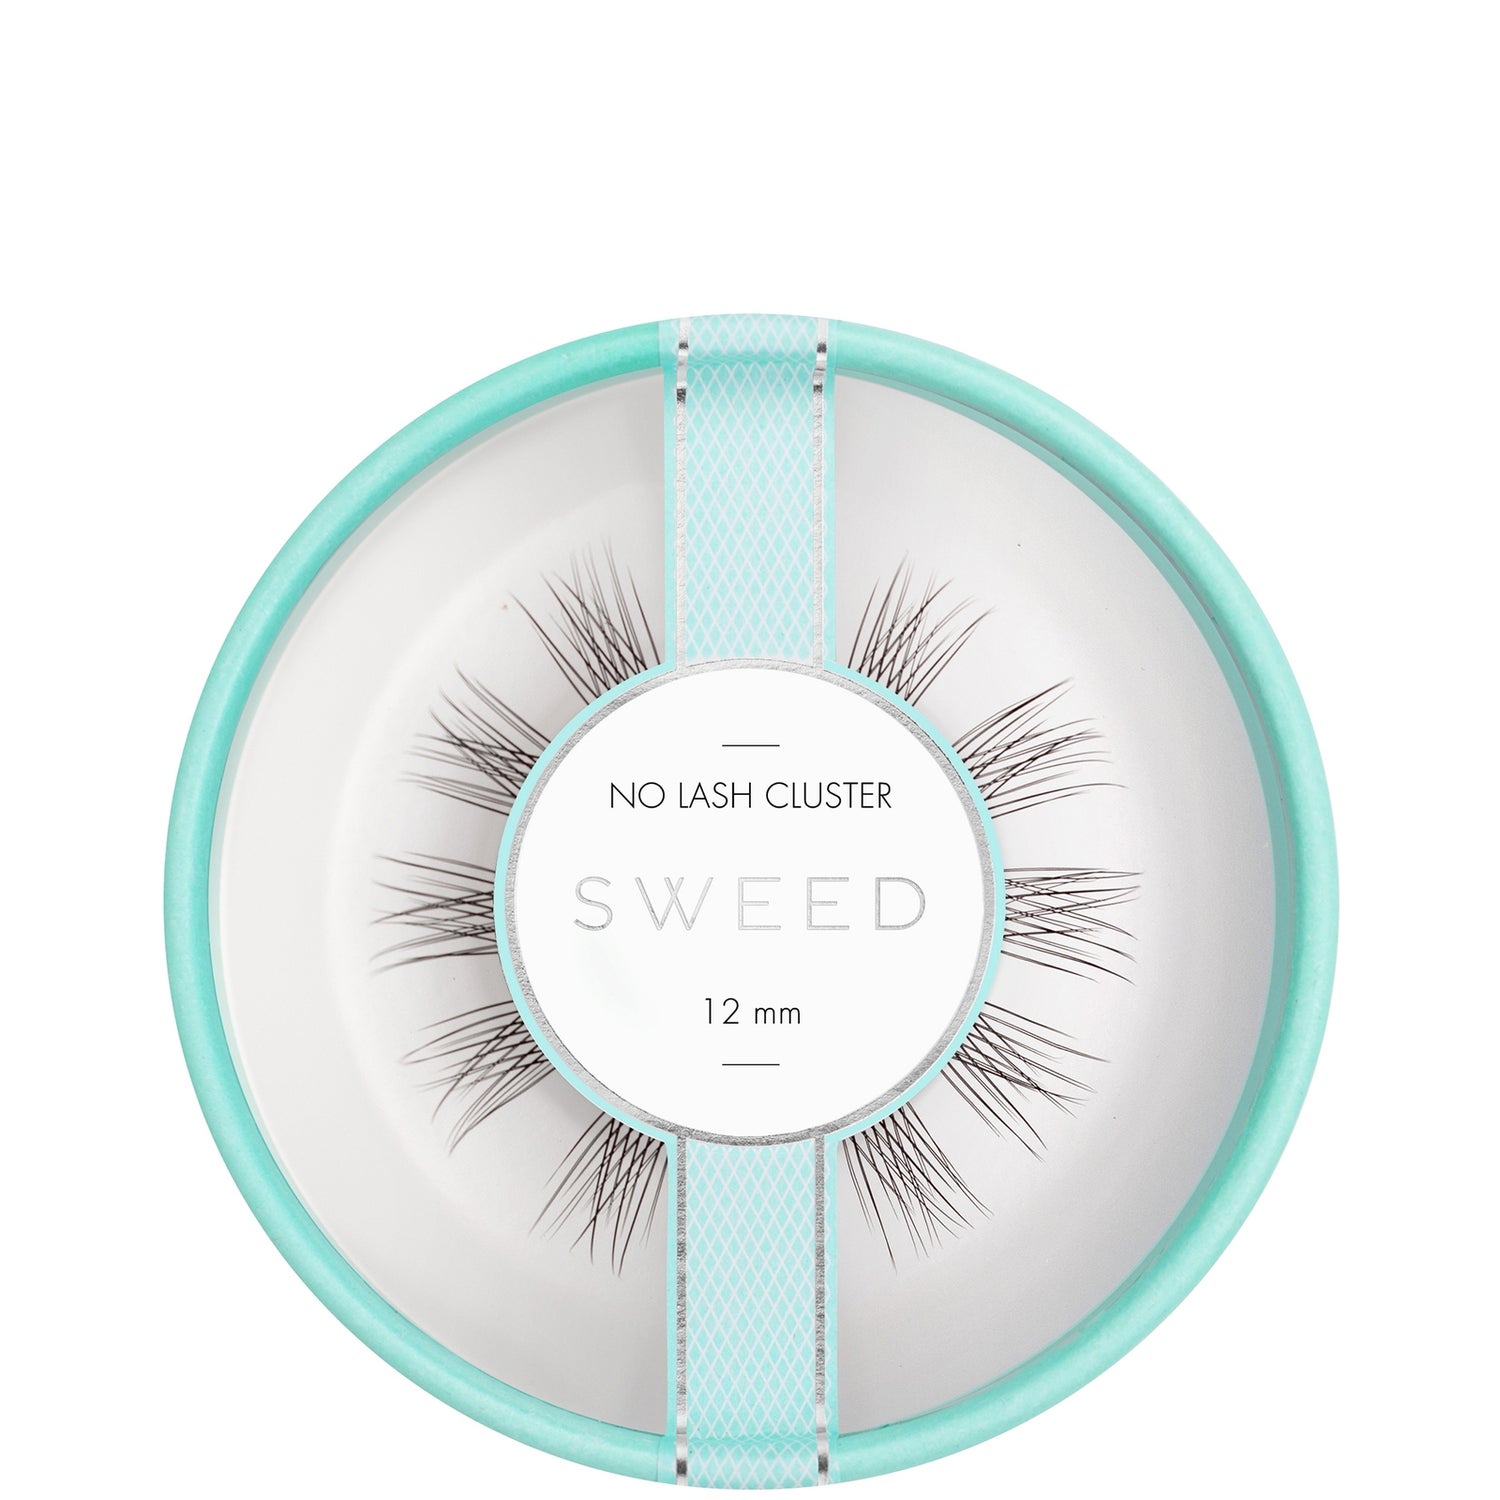 Sweed No Lash Cluster - 12mm